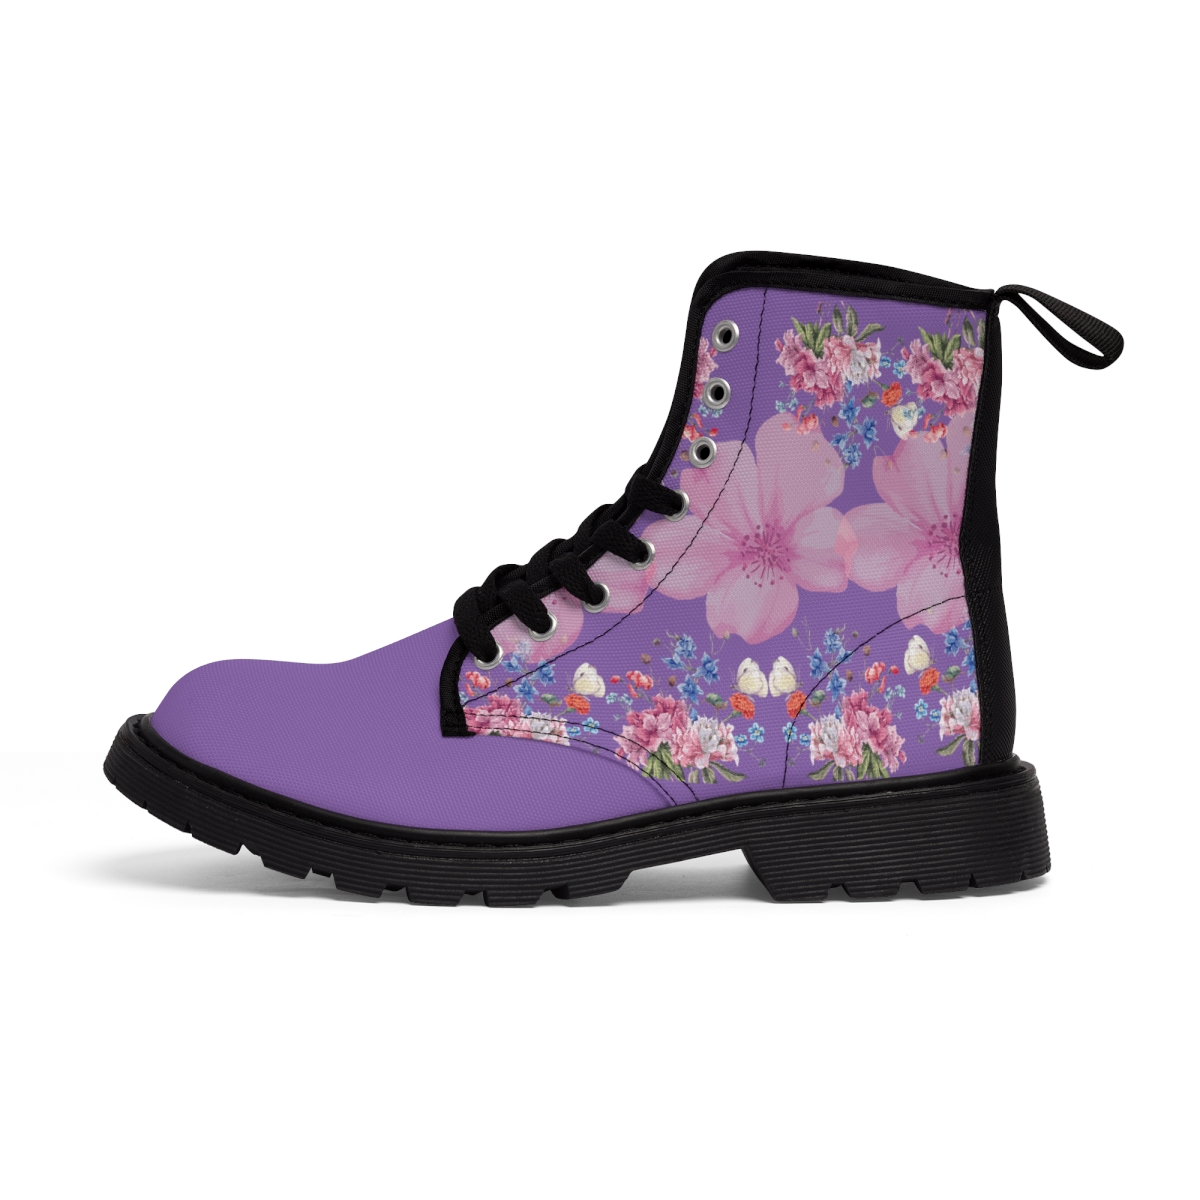 Pinky Women's Canvas Boots product thumbnail image